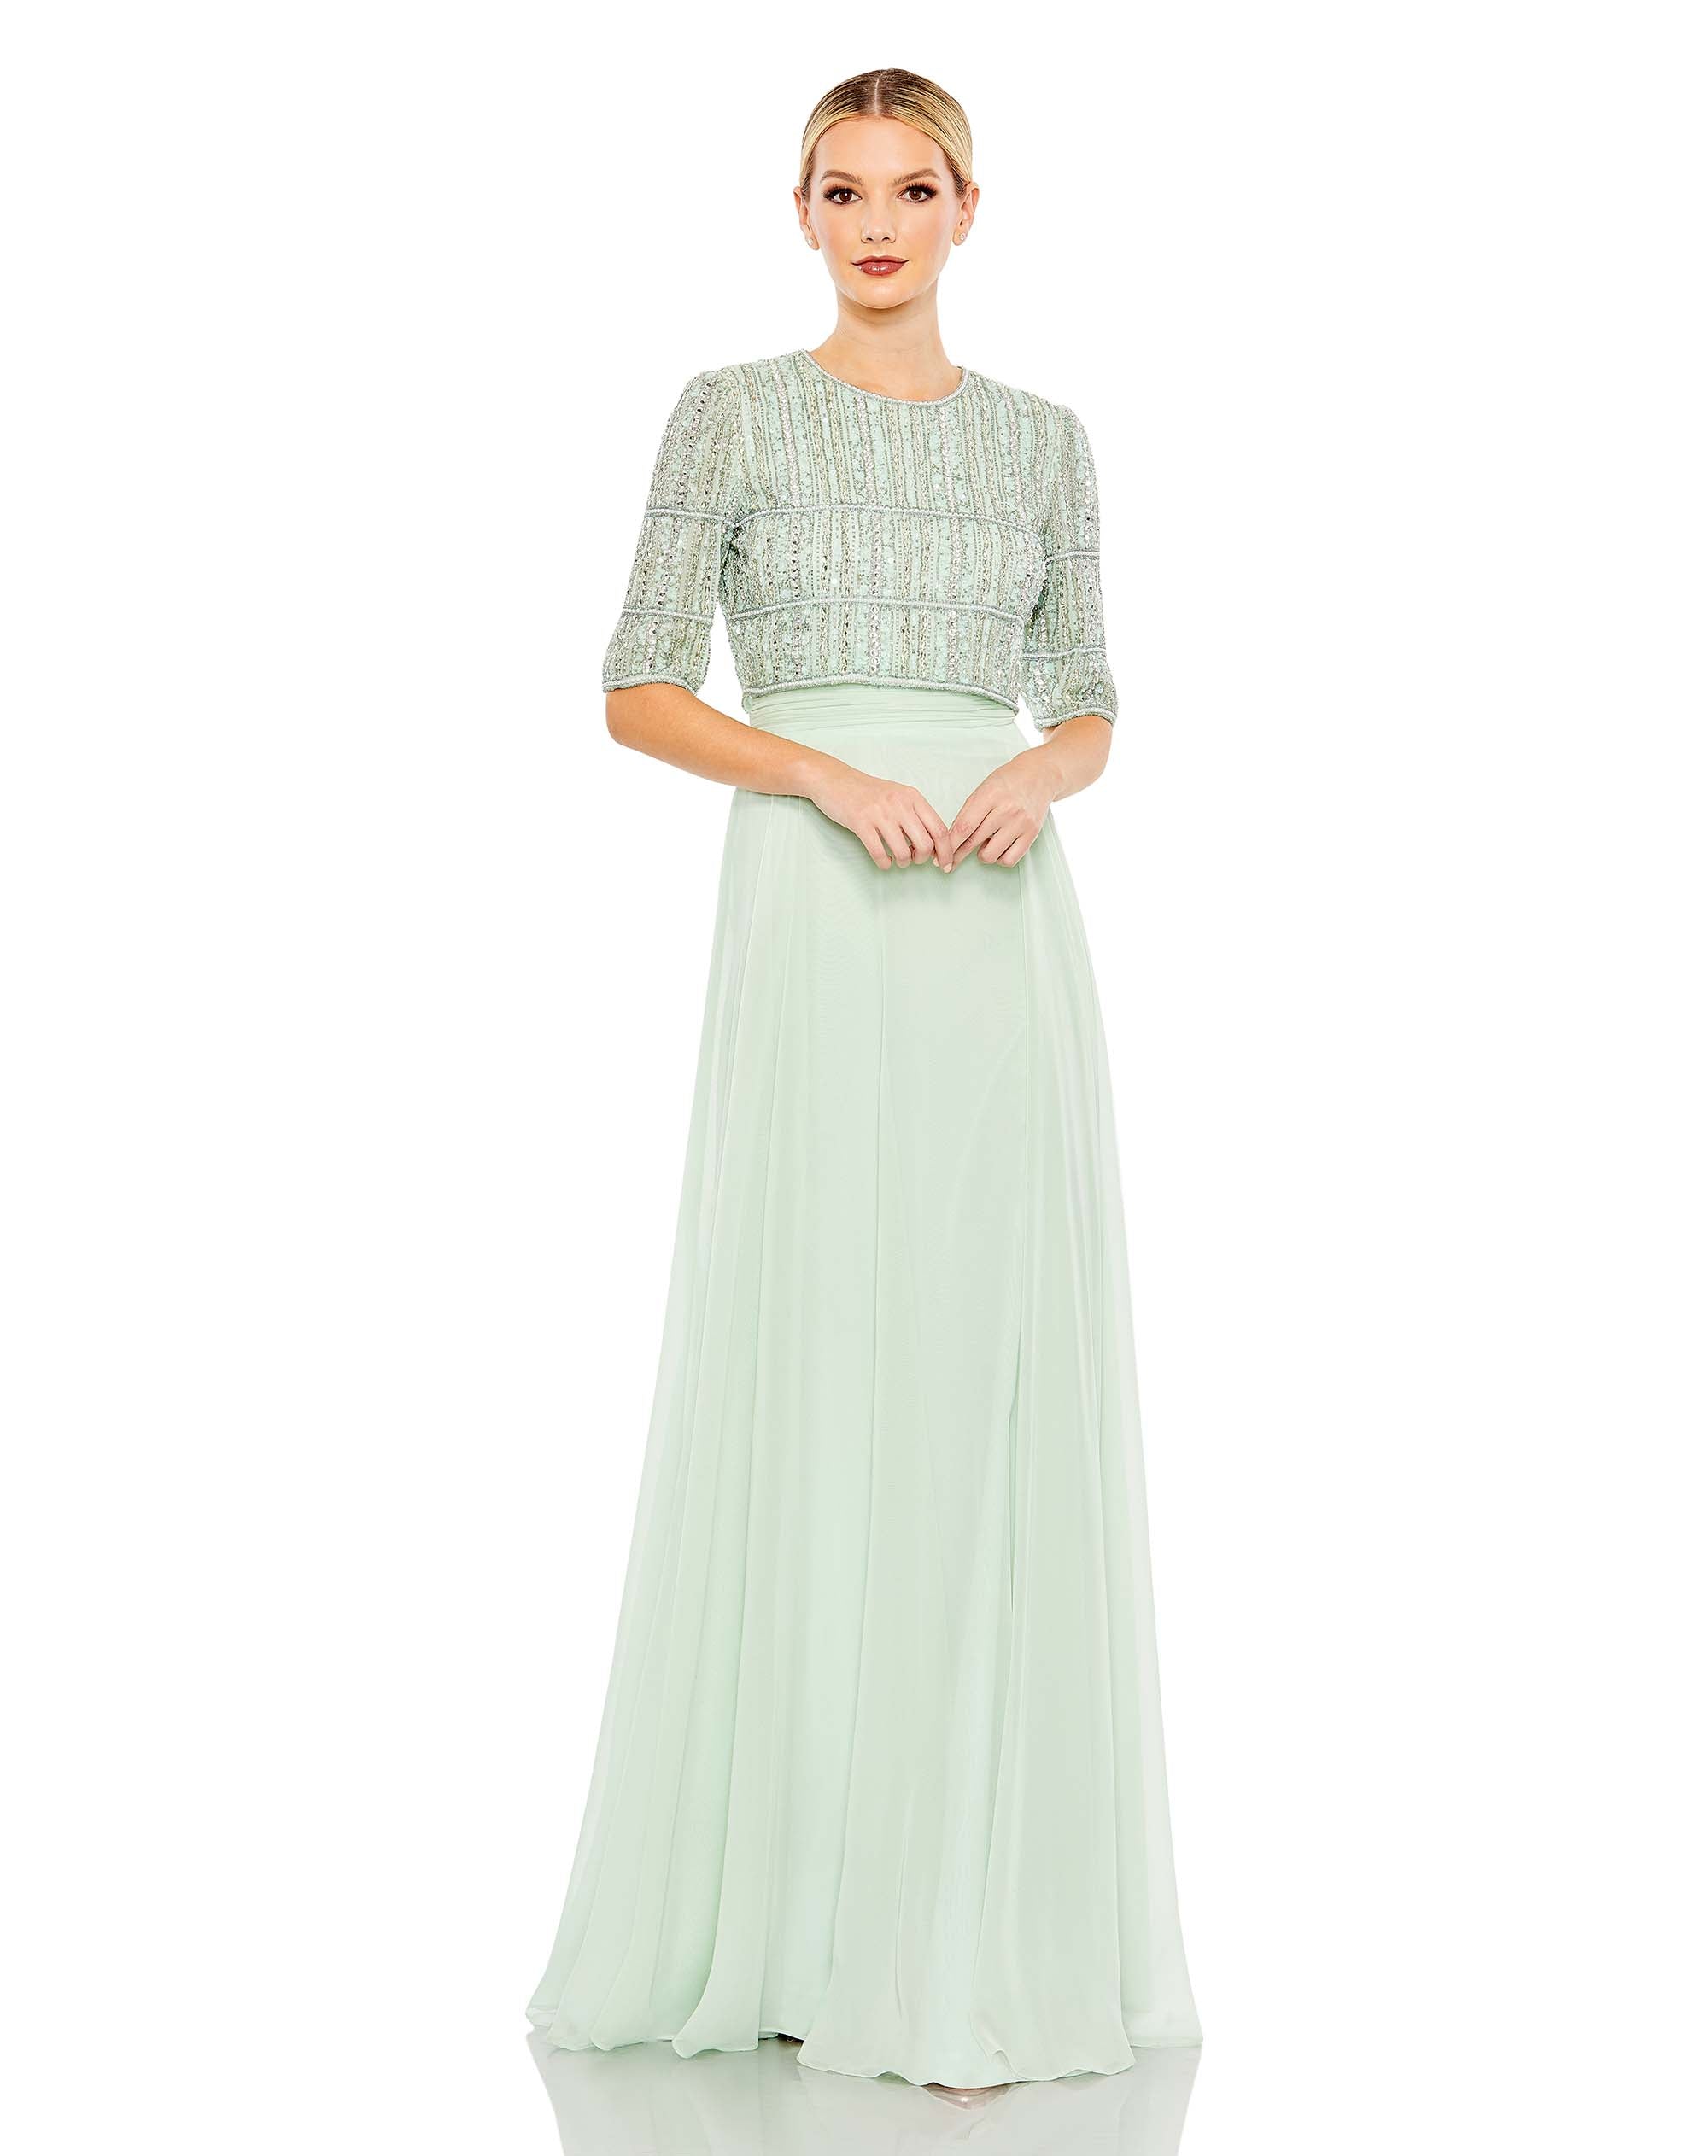 Chiffon Gown w/ Fully Beaded 3/4 Sleeve Top